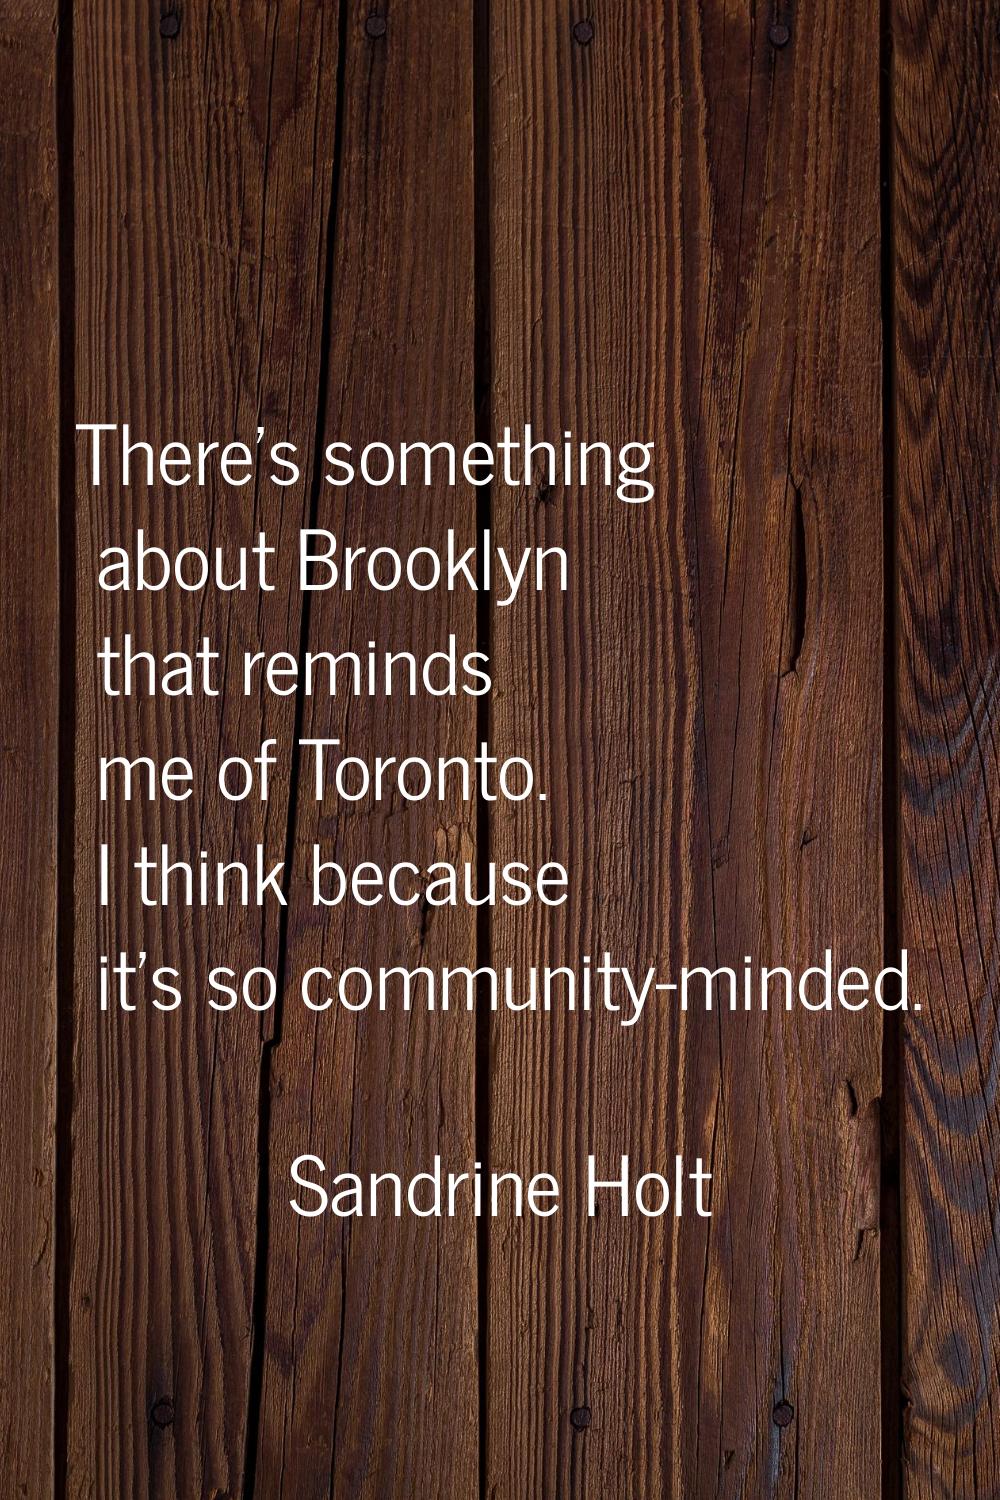 There's something about Brooklyn that reminds me of Toronto. I think because it's so community-mind